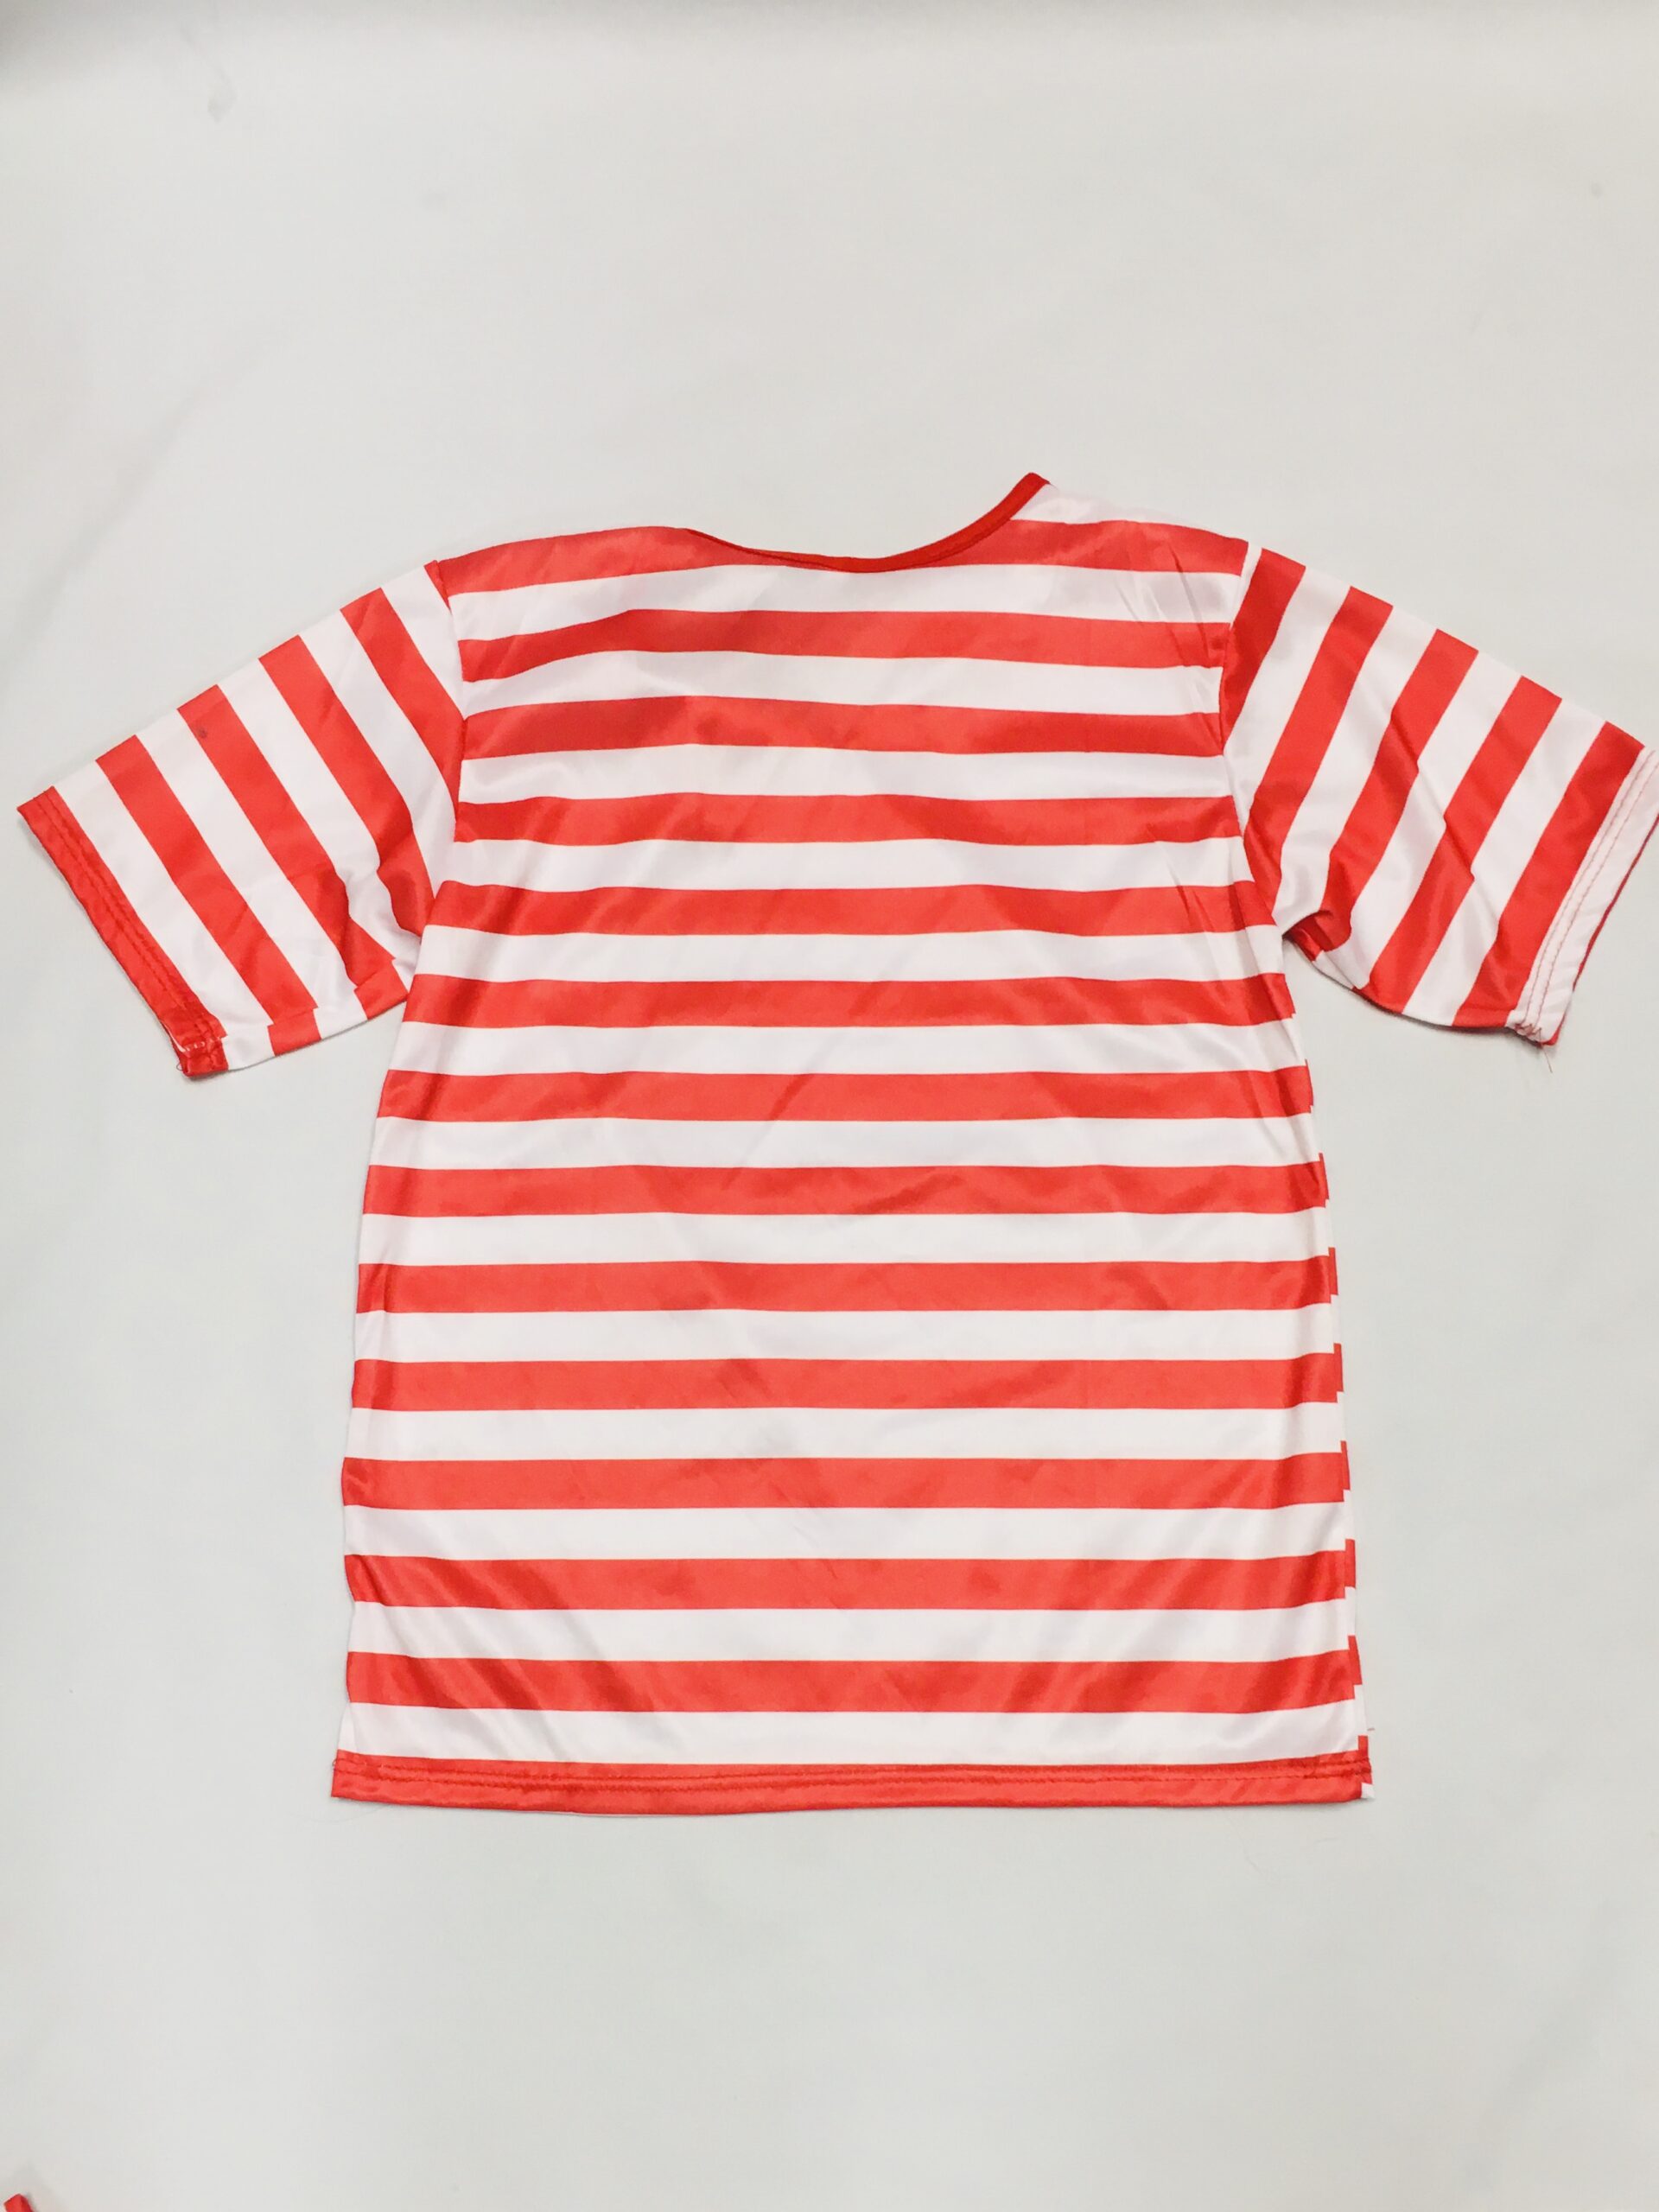 Featured image for “Red & White Striped Top (Short Sleeve), Child”